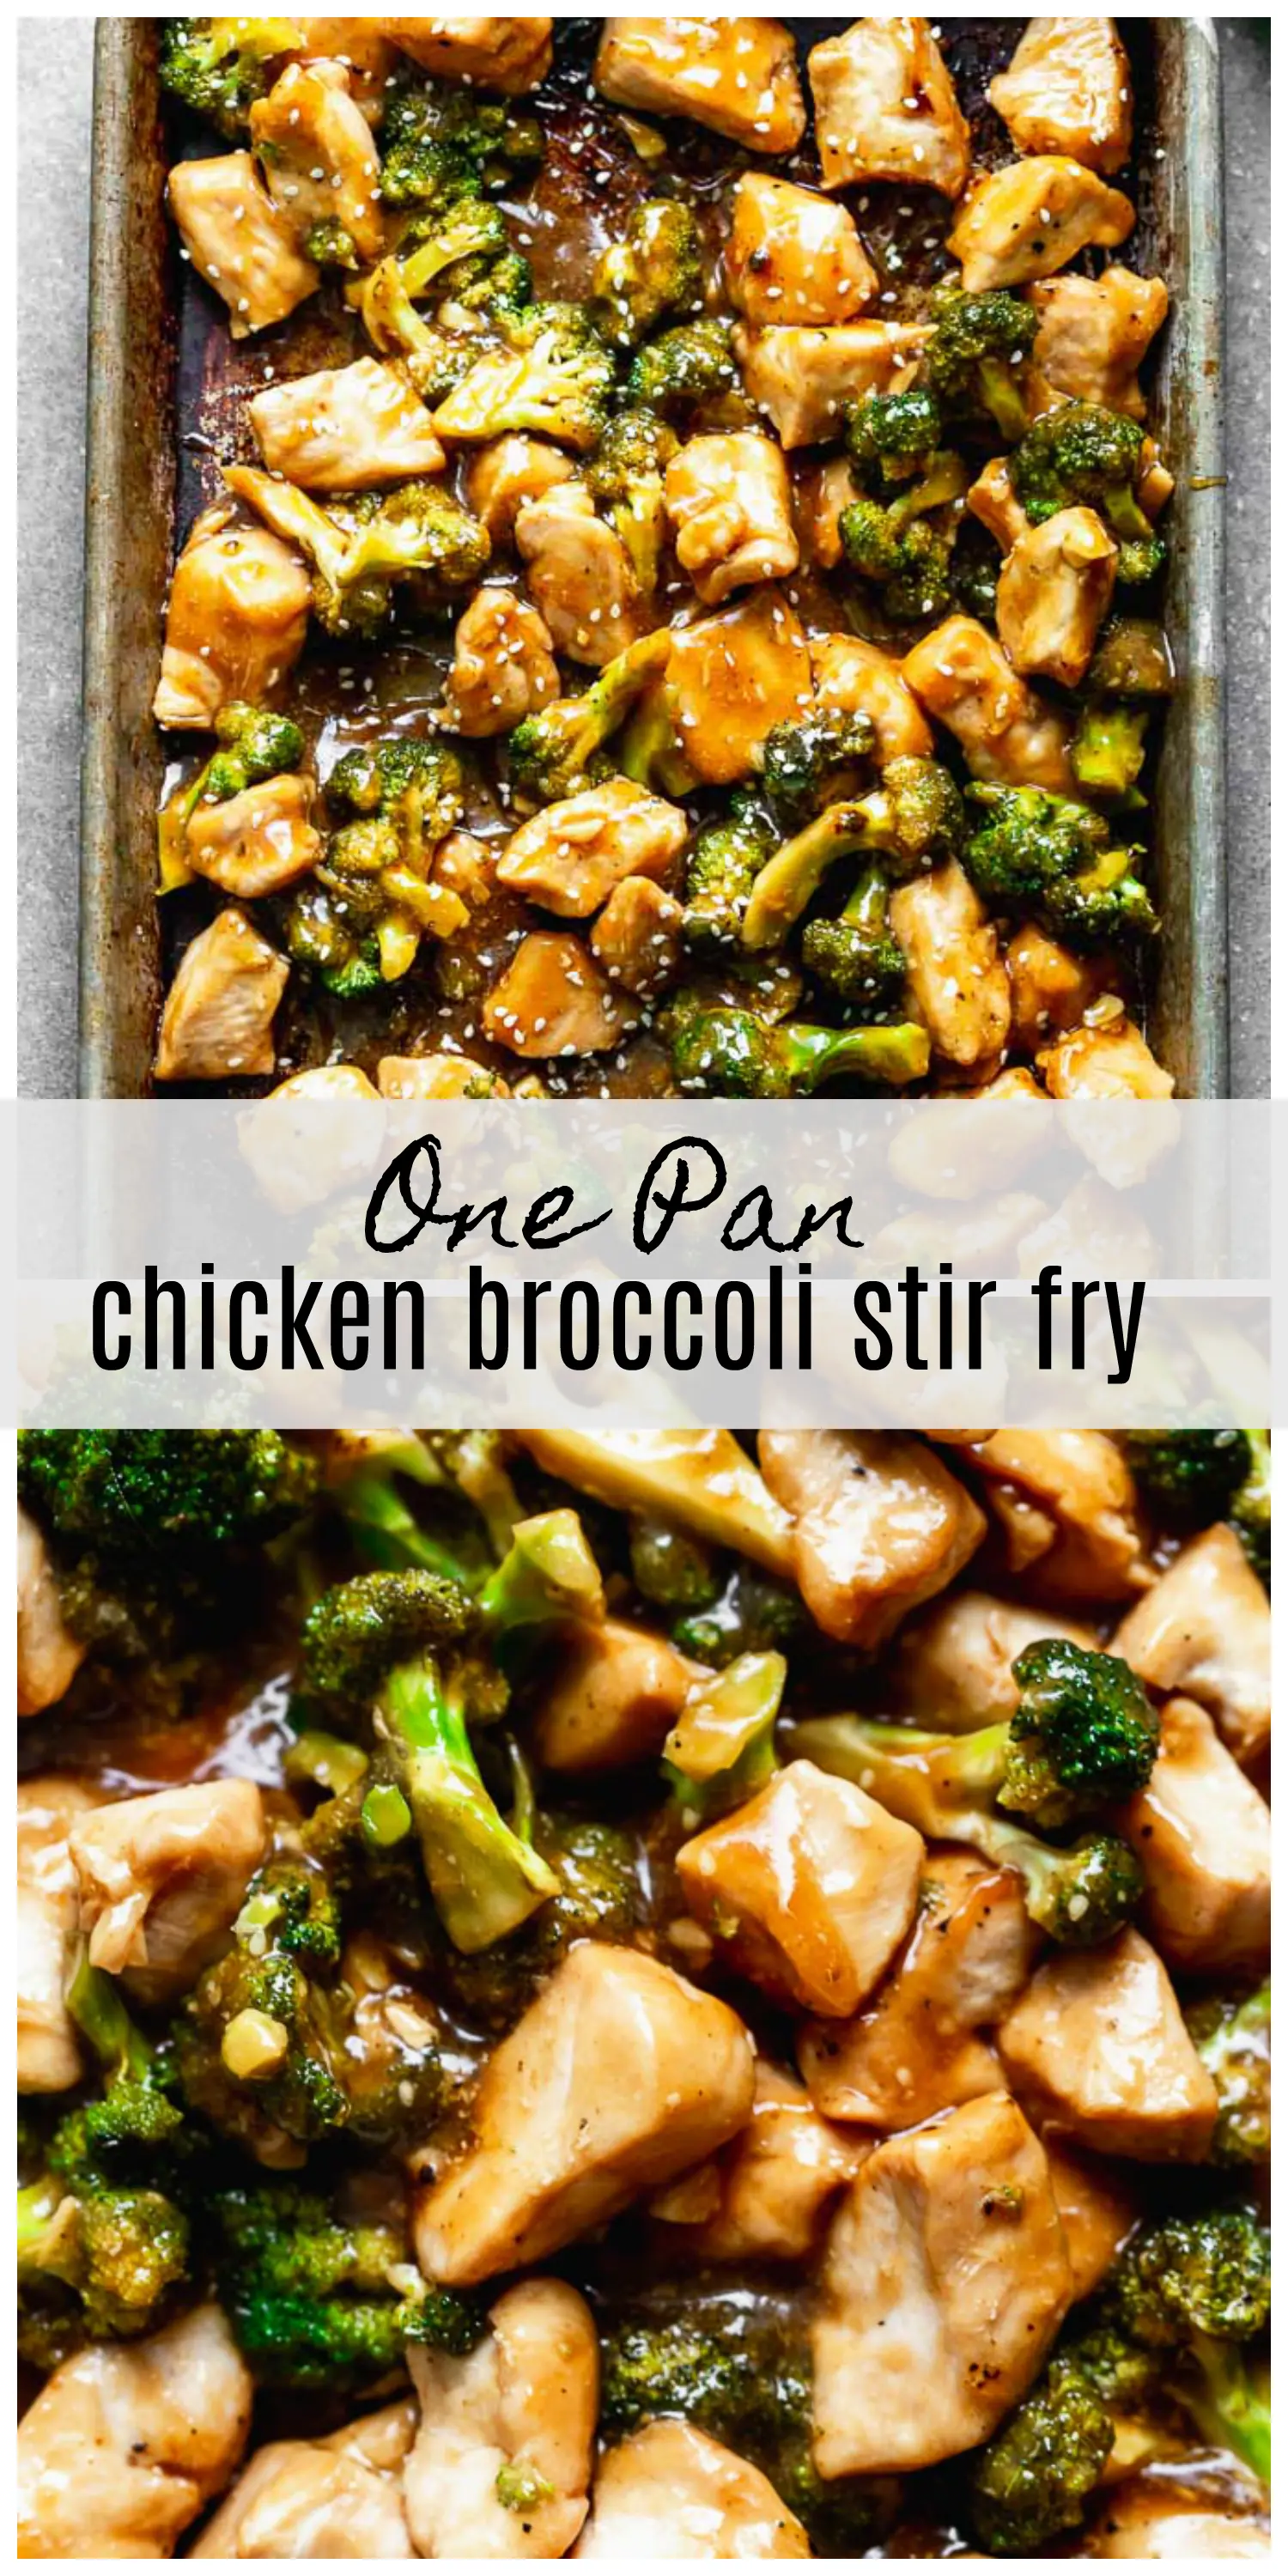 Chinese Chicken Broccoli Stir Fry is a healthier version of a classic, and it's all made in the oven! Tender chicken and crisp broccoli is tossed in a sweet soy glaze and served with simple white rice. Quick, easy, and virtually mess free!